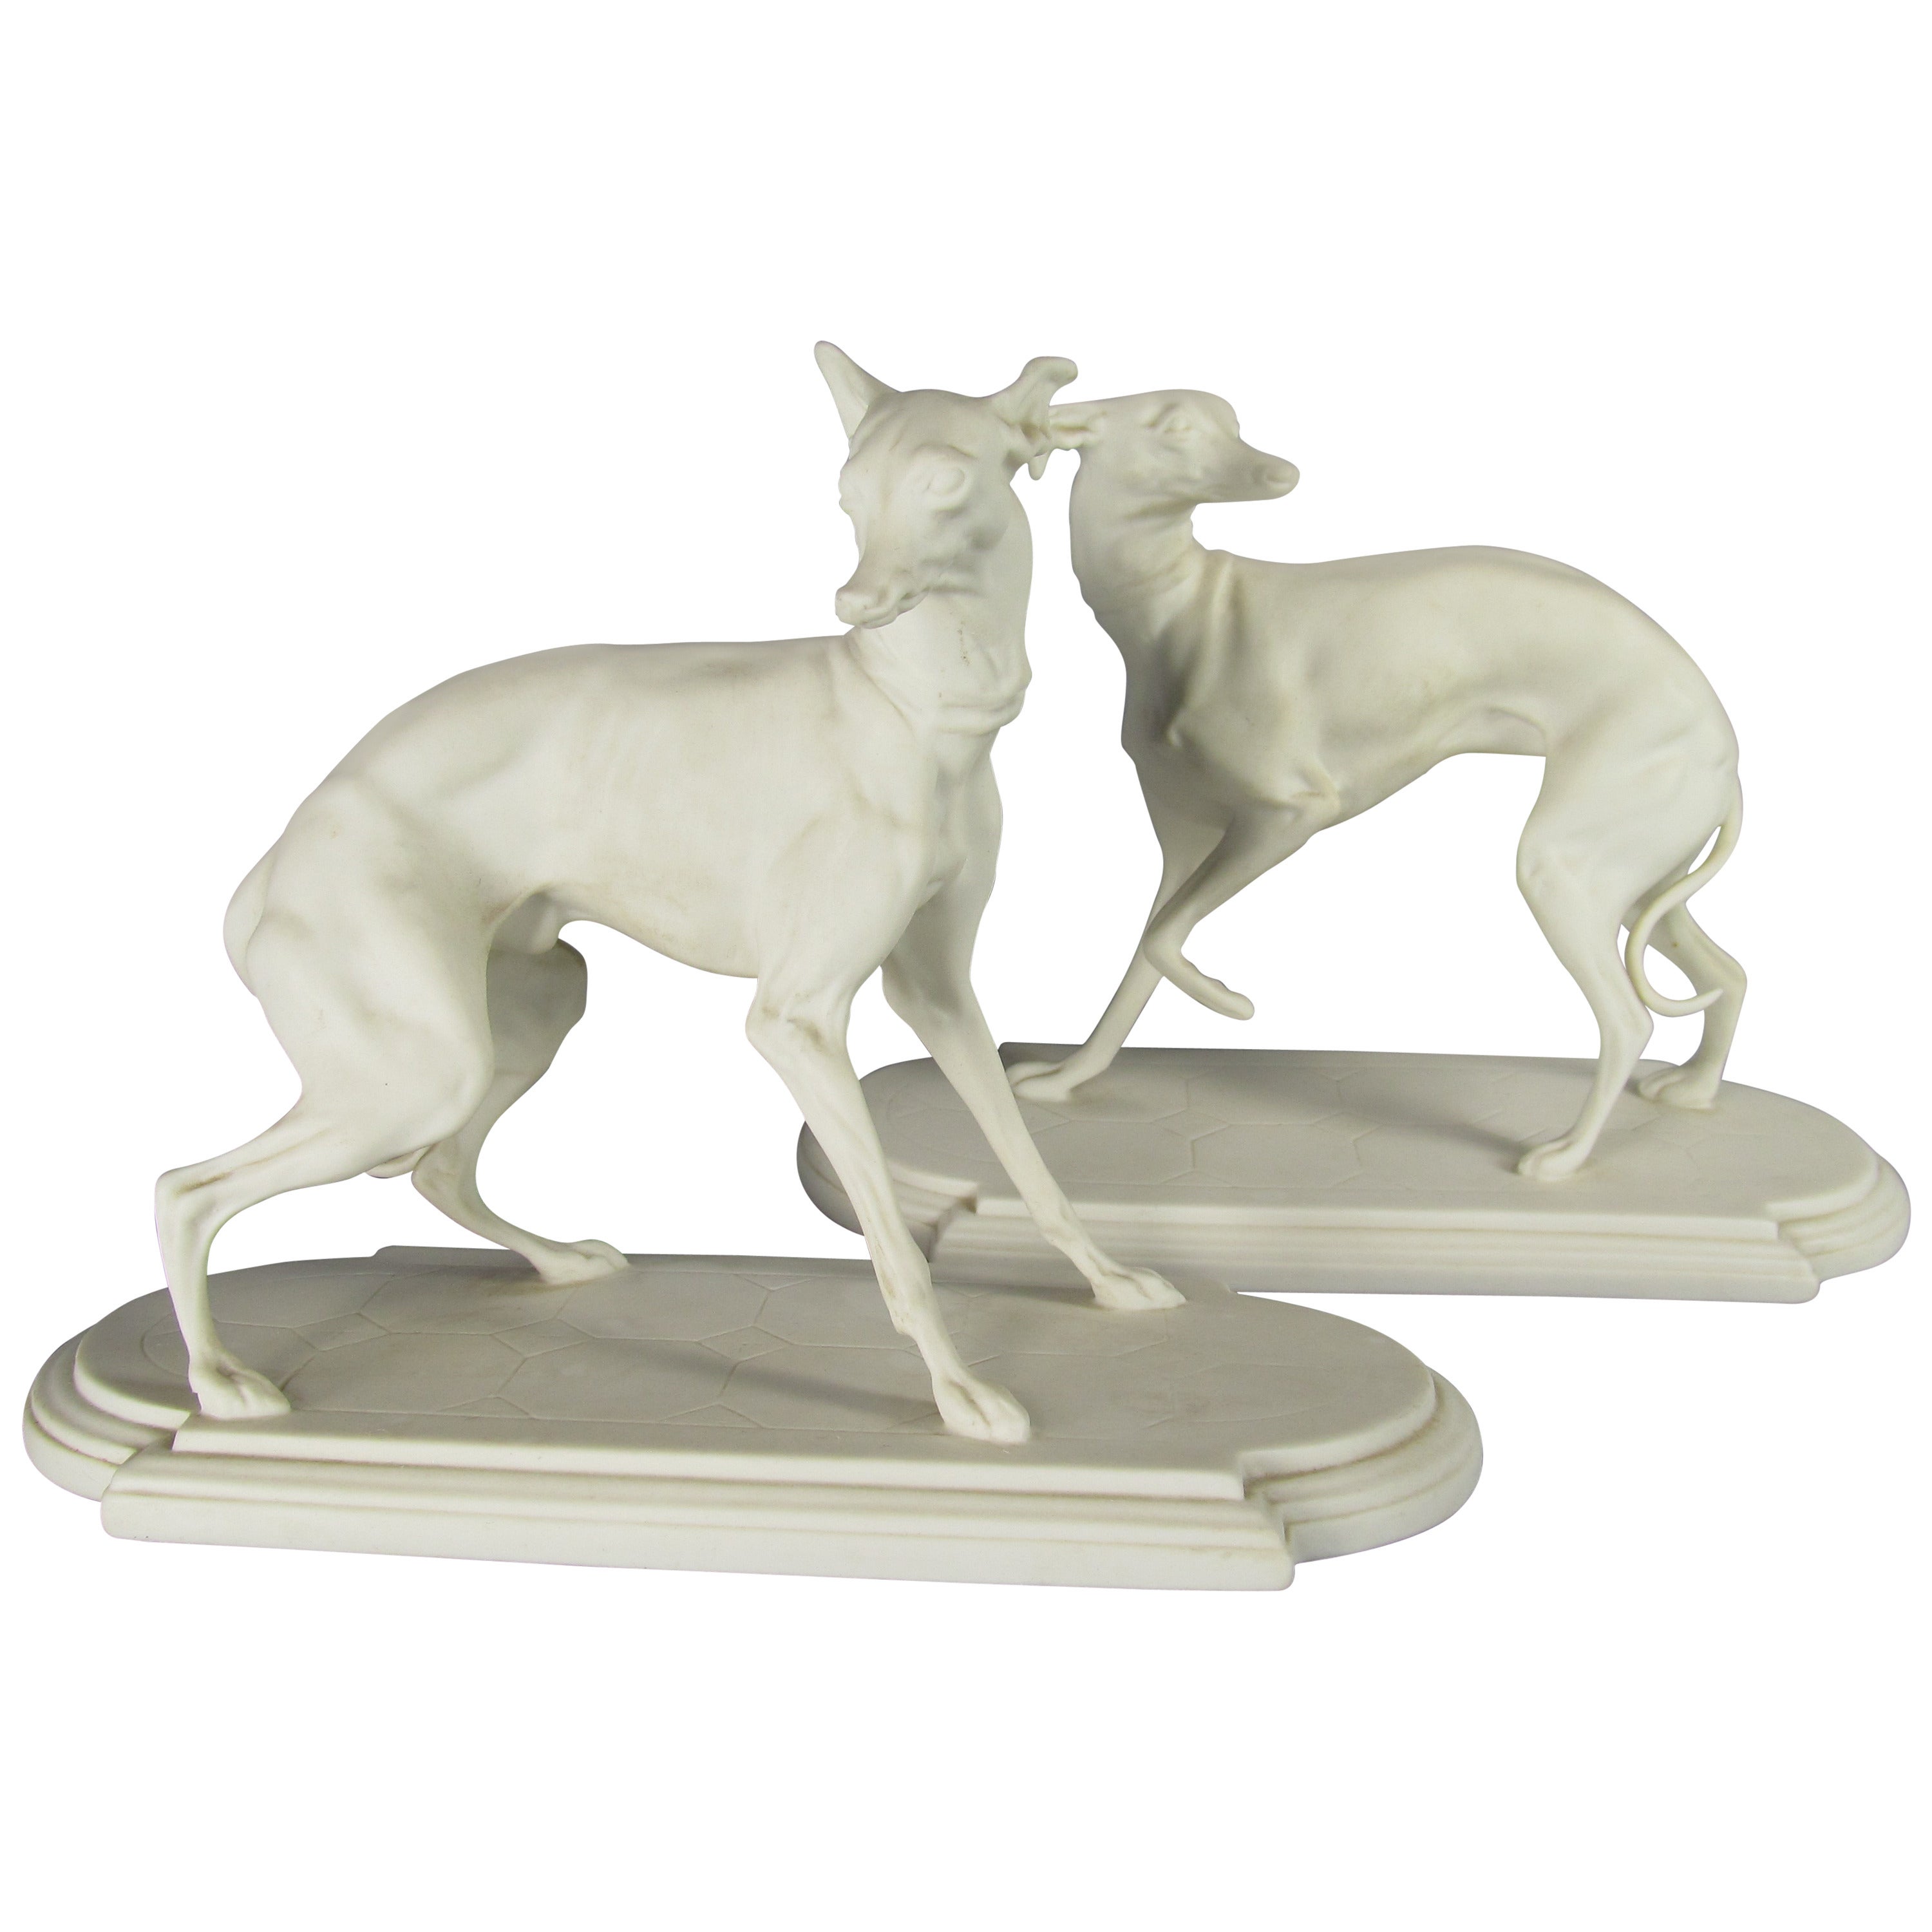 Pair of Porcelain Boehm Whippets